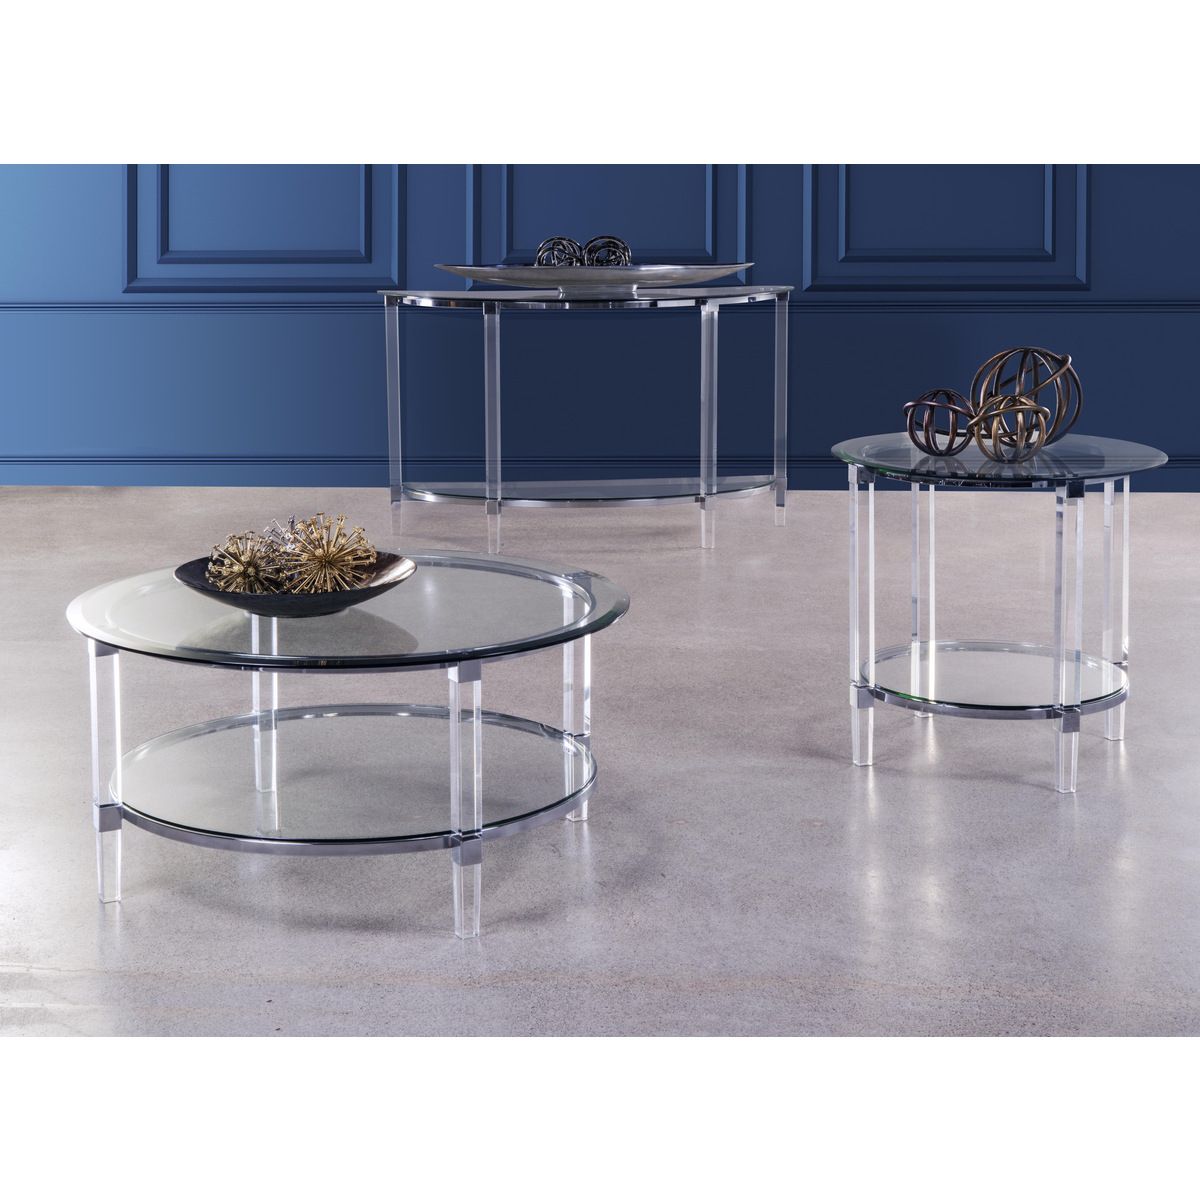 2020 Silver And Acrylic Coffee Tables Inside 3656 01 Round Coffee Table With Acrylic Legs (View 2 of 20)